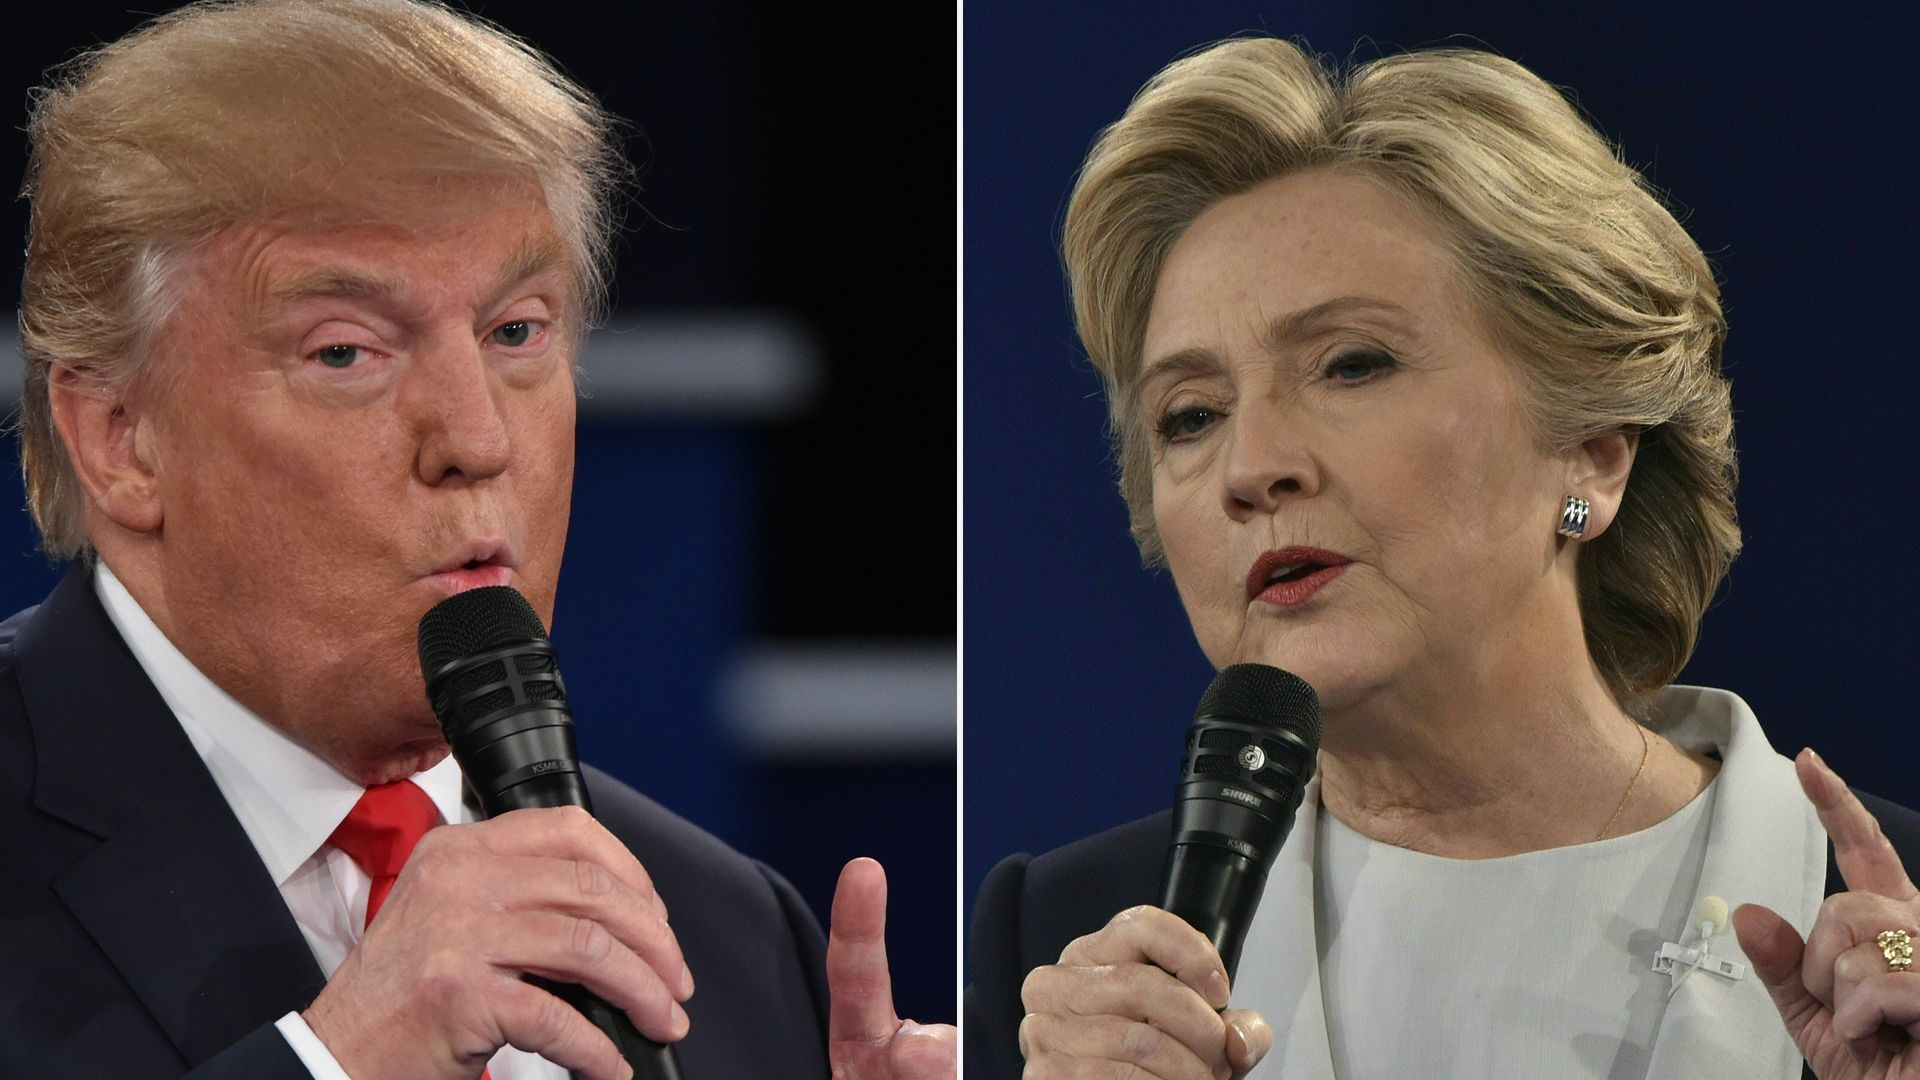 Combination pictures of presidential candidates Donald Trump and Hillary Clinton during the second presidential debate  in St. Louis, Missouri on October 9, 2016. 